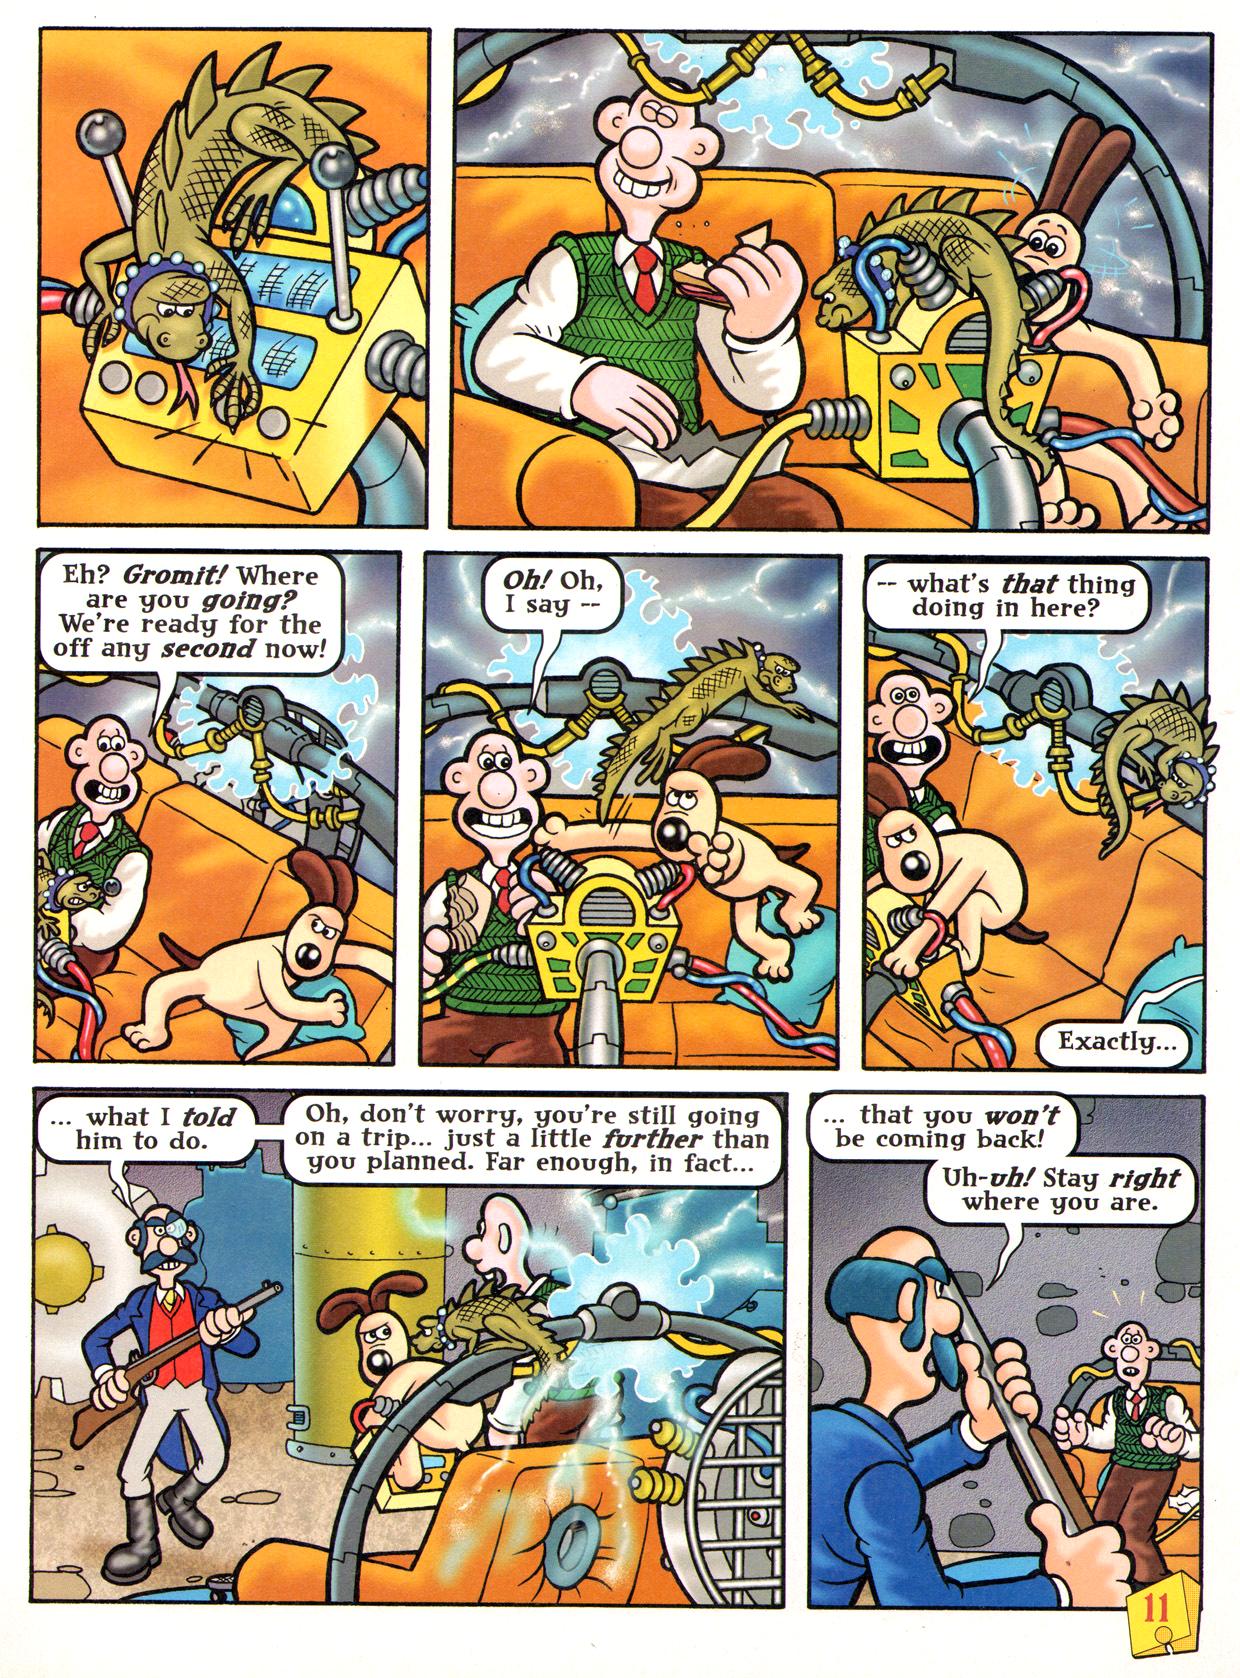 Read online Wallace & Gromit Comic comic -  Issue #11 - 11